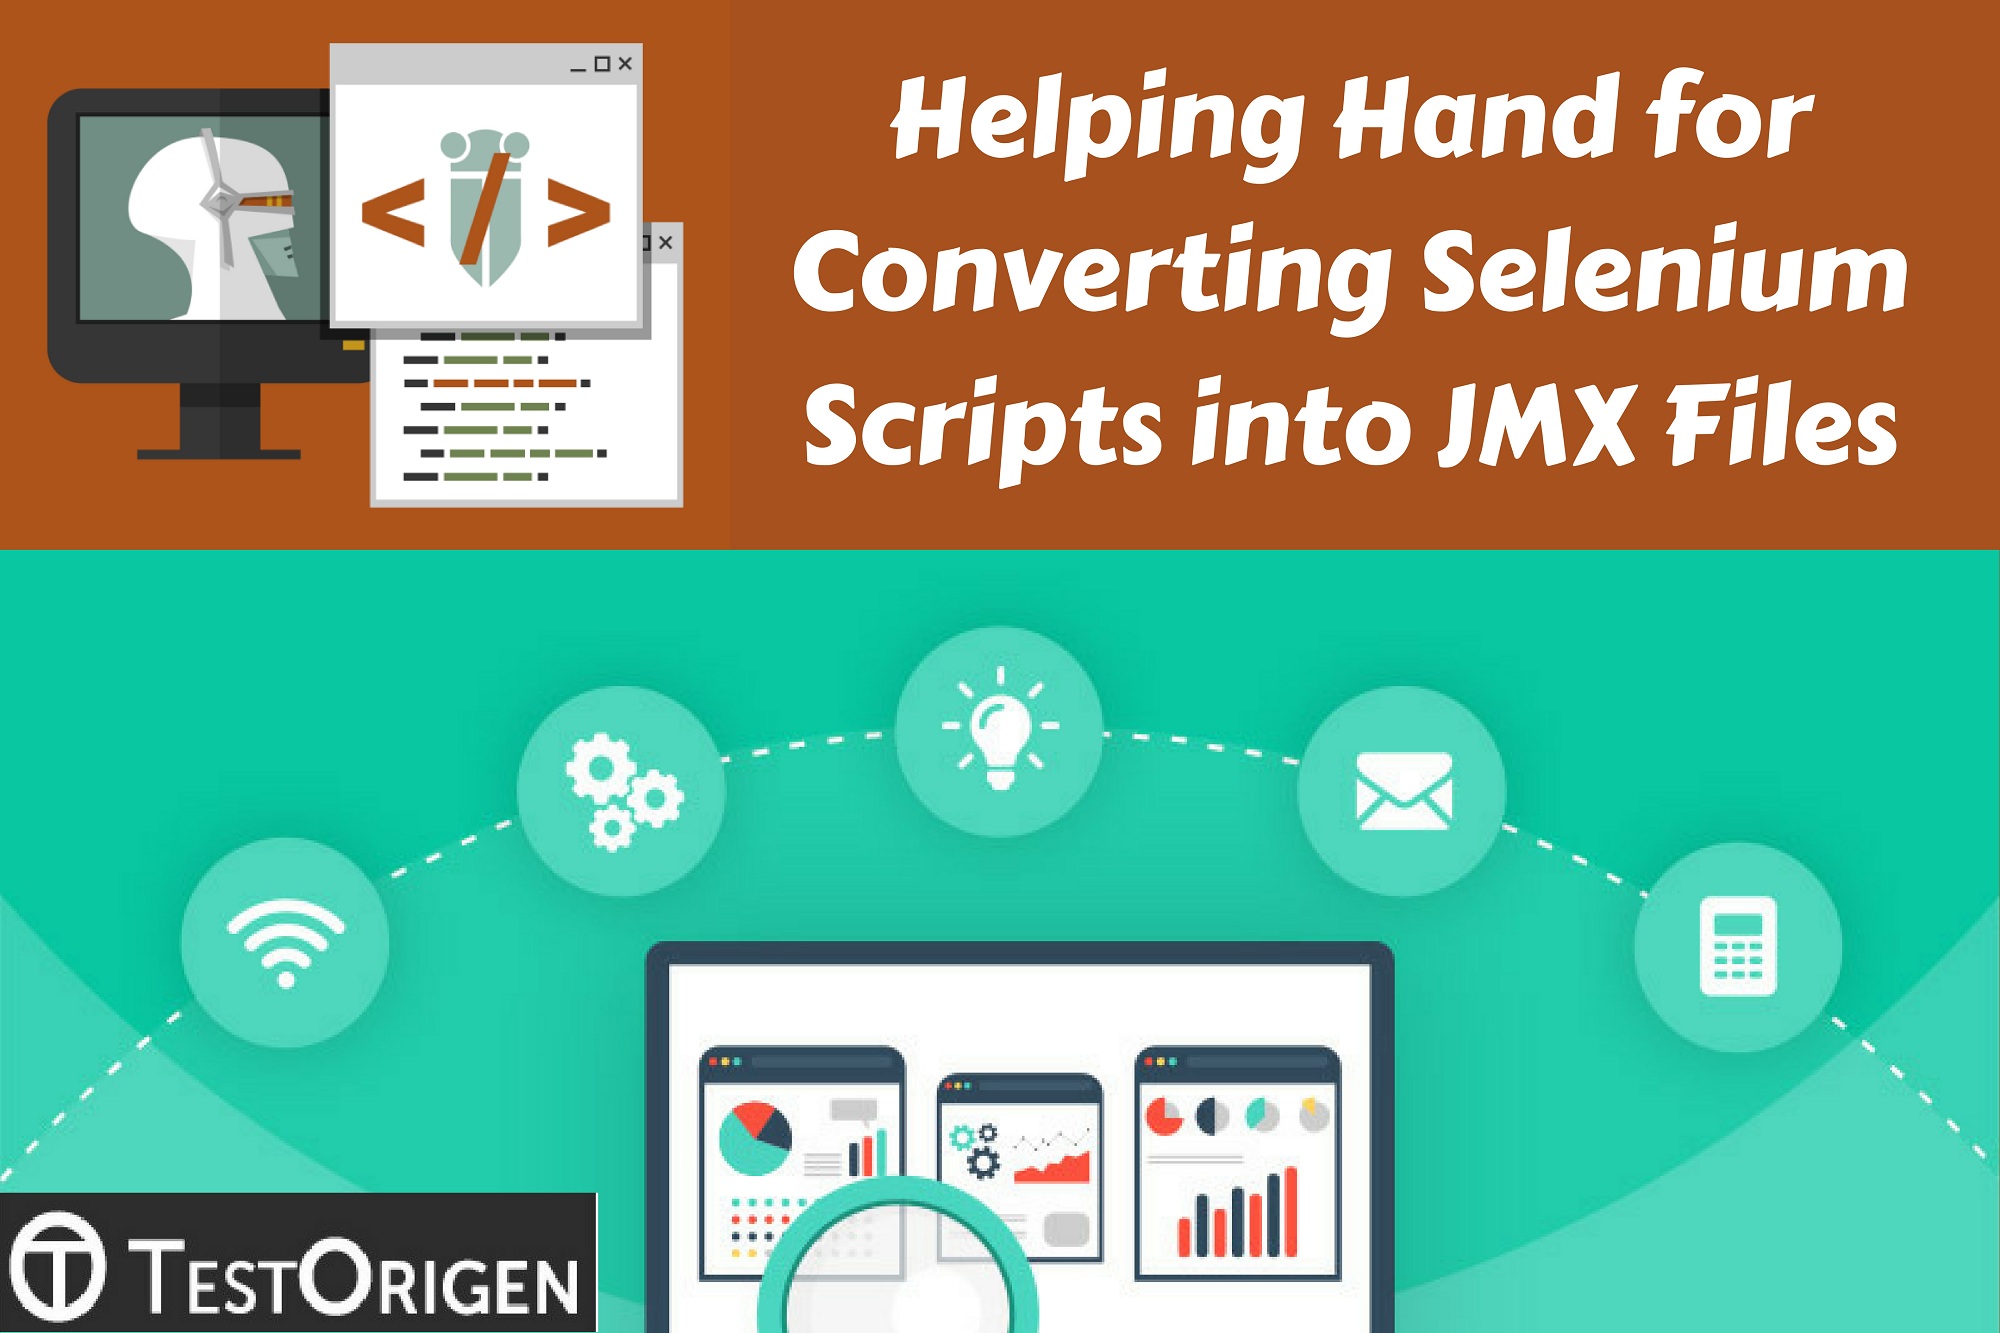 Helping Hand for Converting Selenium Scripts into JMX Files